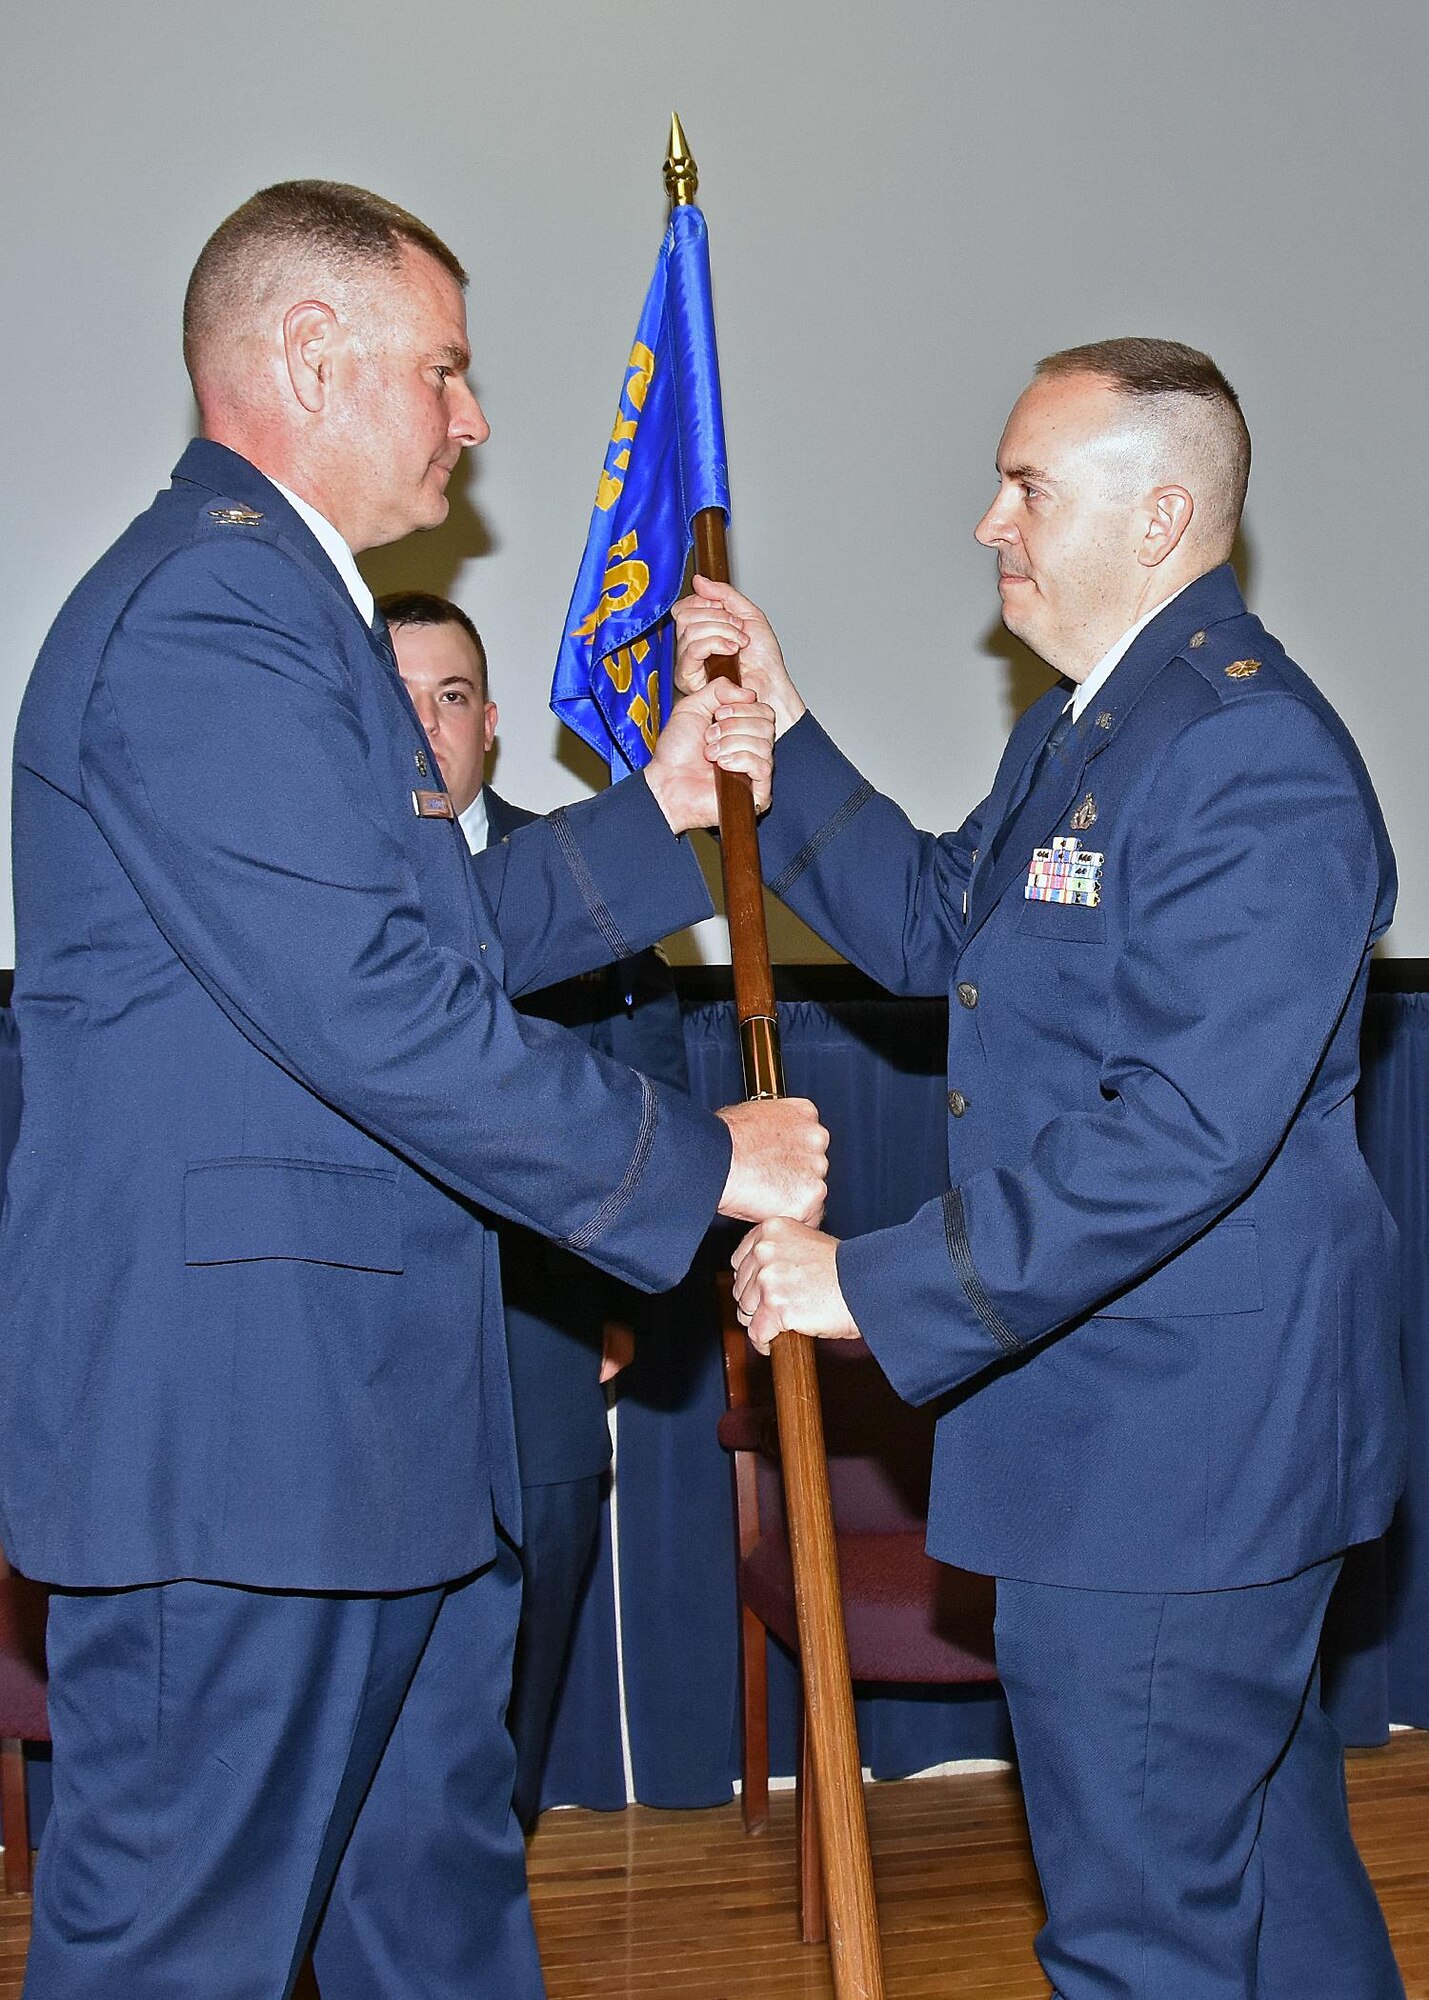 Major Edward Ouellette Junior assumes command of the 143d Force Support Squadron during a ceremony held at Quonset Air National Guard Base, North Kingstown, Rhode Island. Major Ouellette's father, retired Lieutenant Colonel Edward Ouellette Senior is the former commander of the Force Support Squadron. Airman First Class Dylan Ouellette, 143d Maintenance Squadron, Major Ouellette's son, serves as the master of ceremonies for the event. 